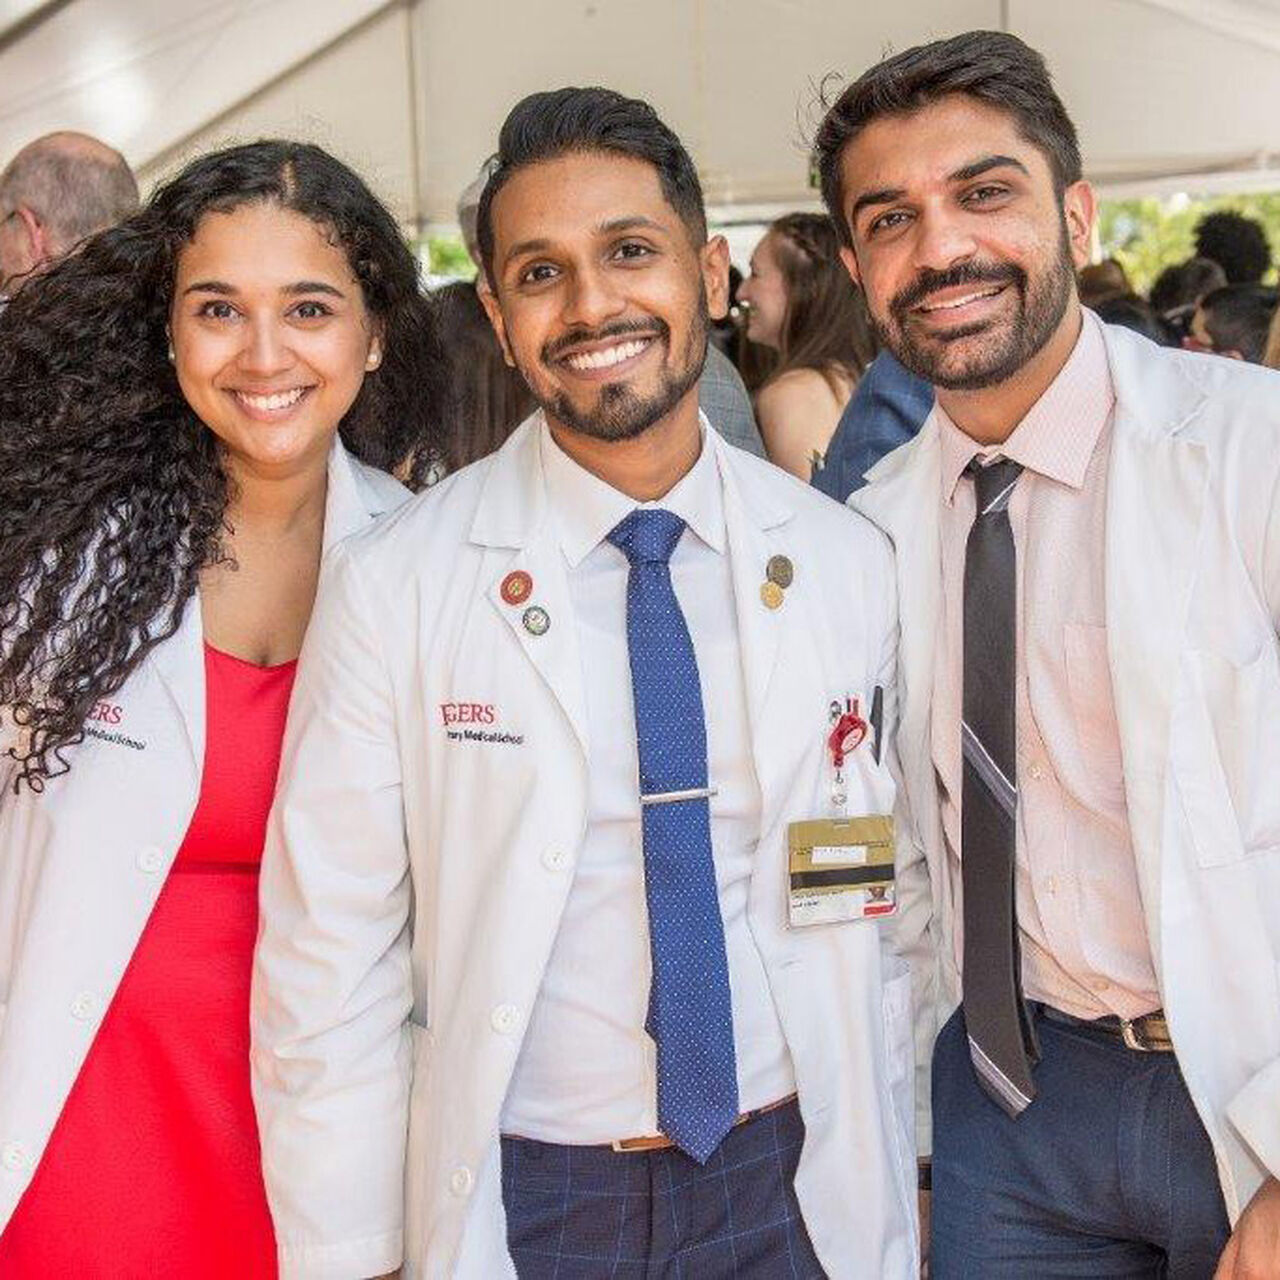 Three smiling medical students image number 0